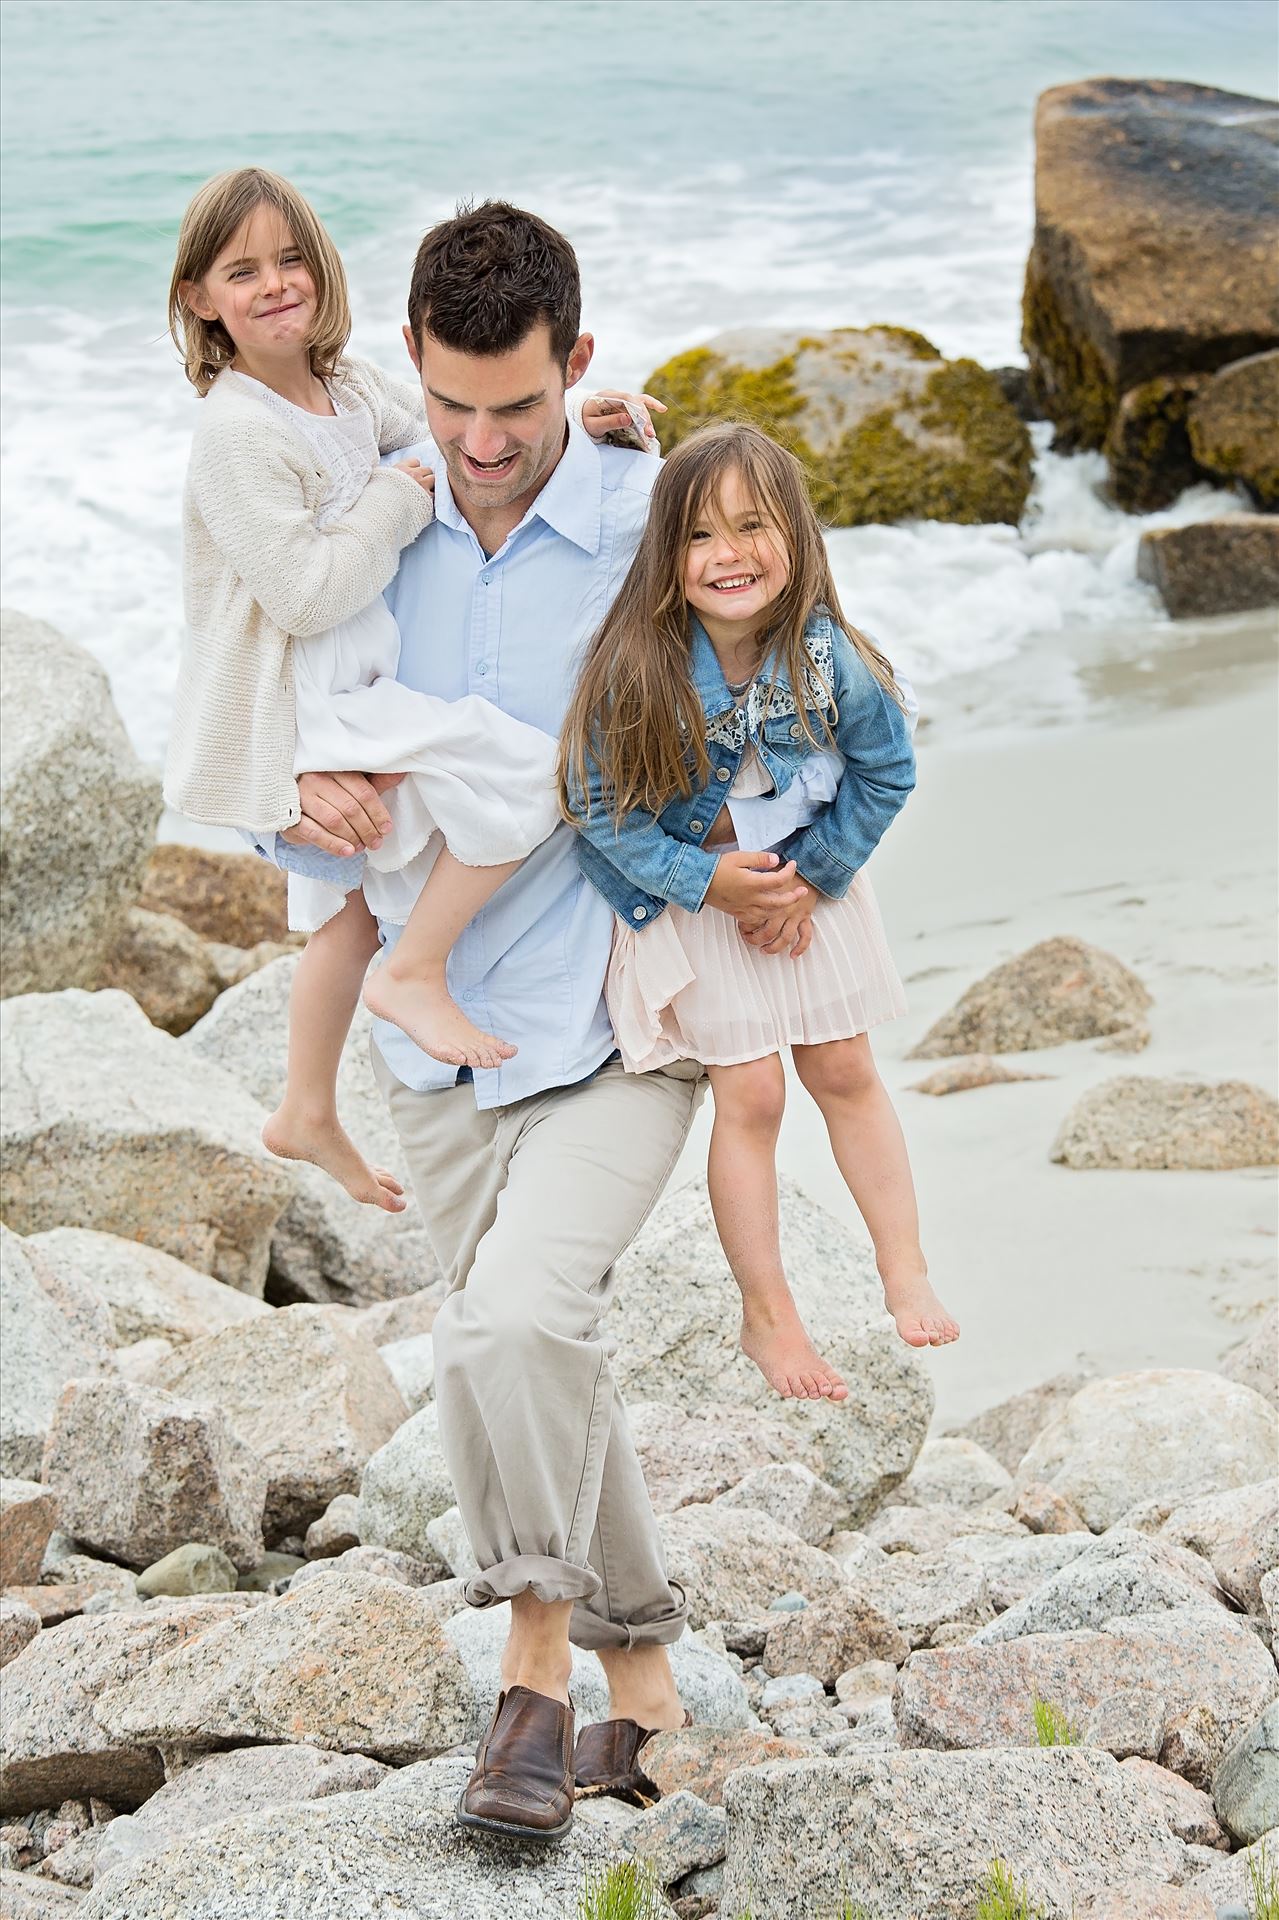 HalfyardFamily 11 - Halfyard Family. Family photography beach session. by Maria Angelopoulos Photogrpahy